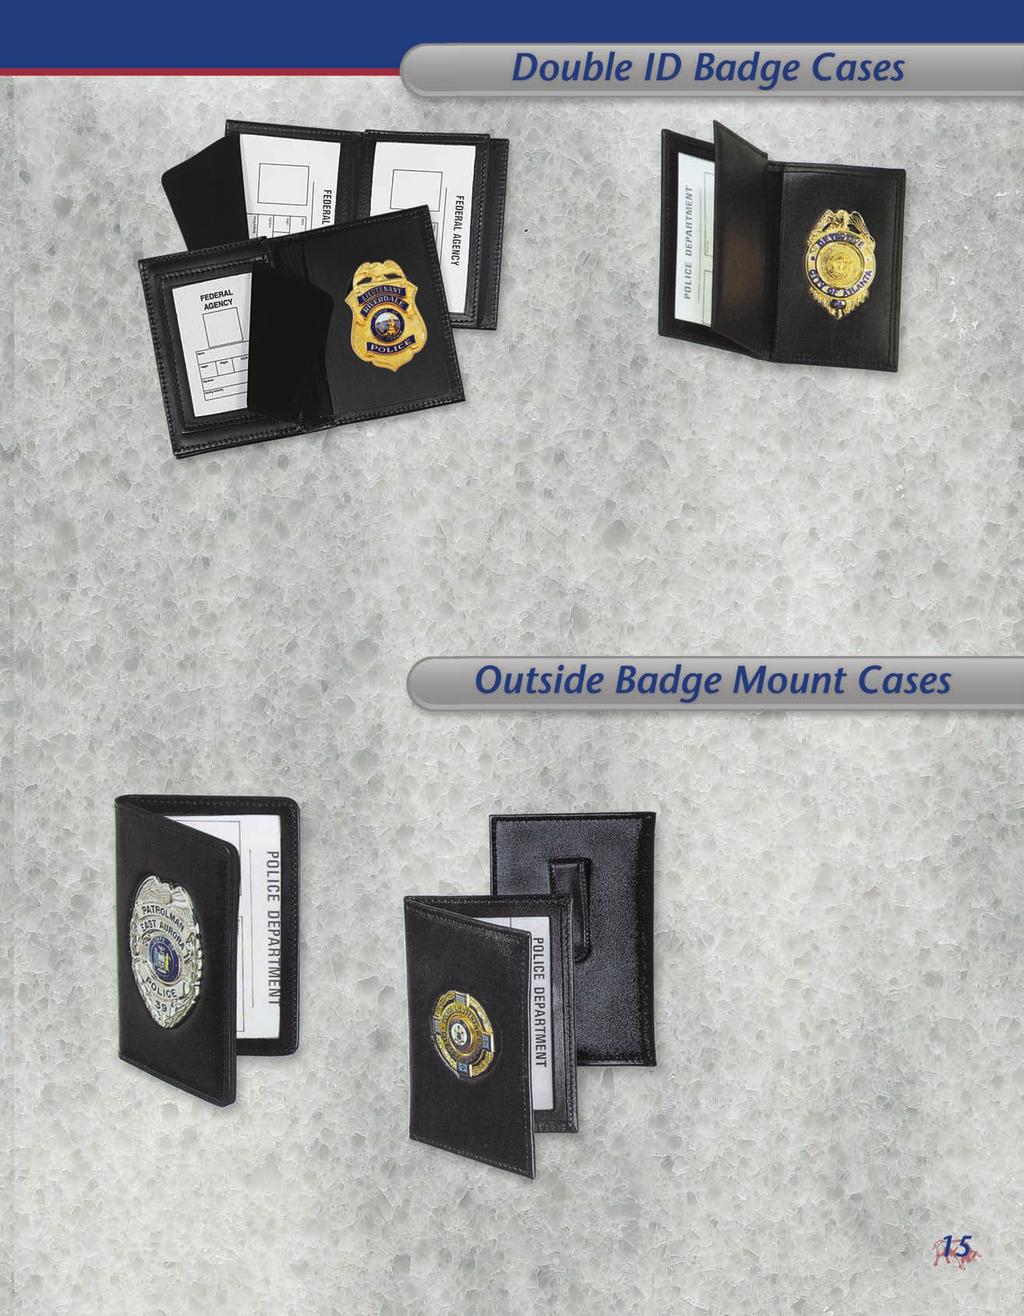 Dress Badge Case with Smart Card Window Side opening, double ID with framed (FW) or bound (BW) windows. Third ID for access/smart card.